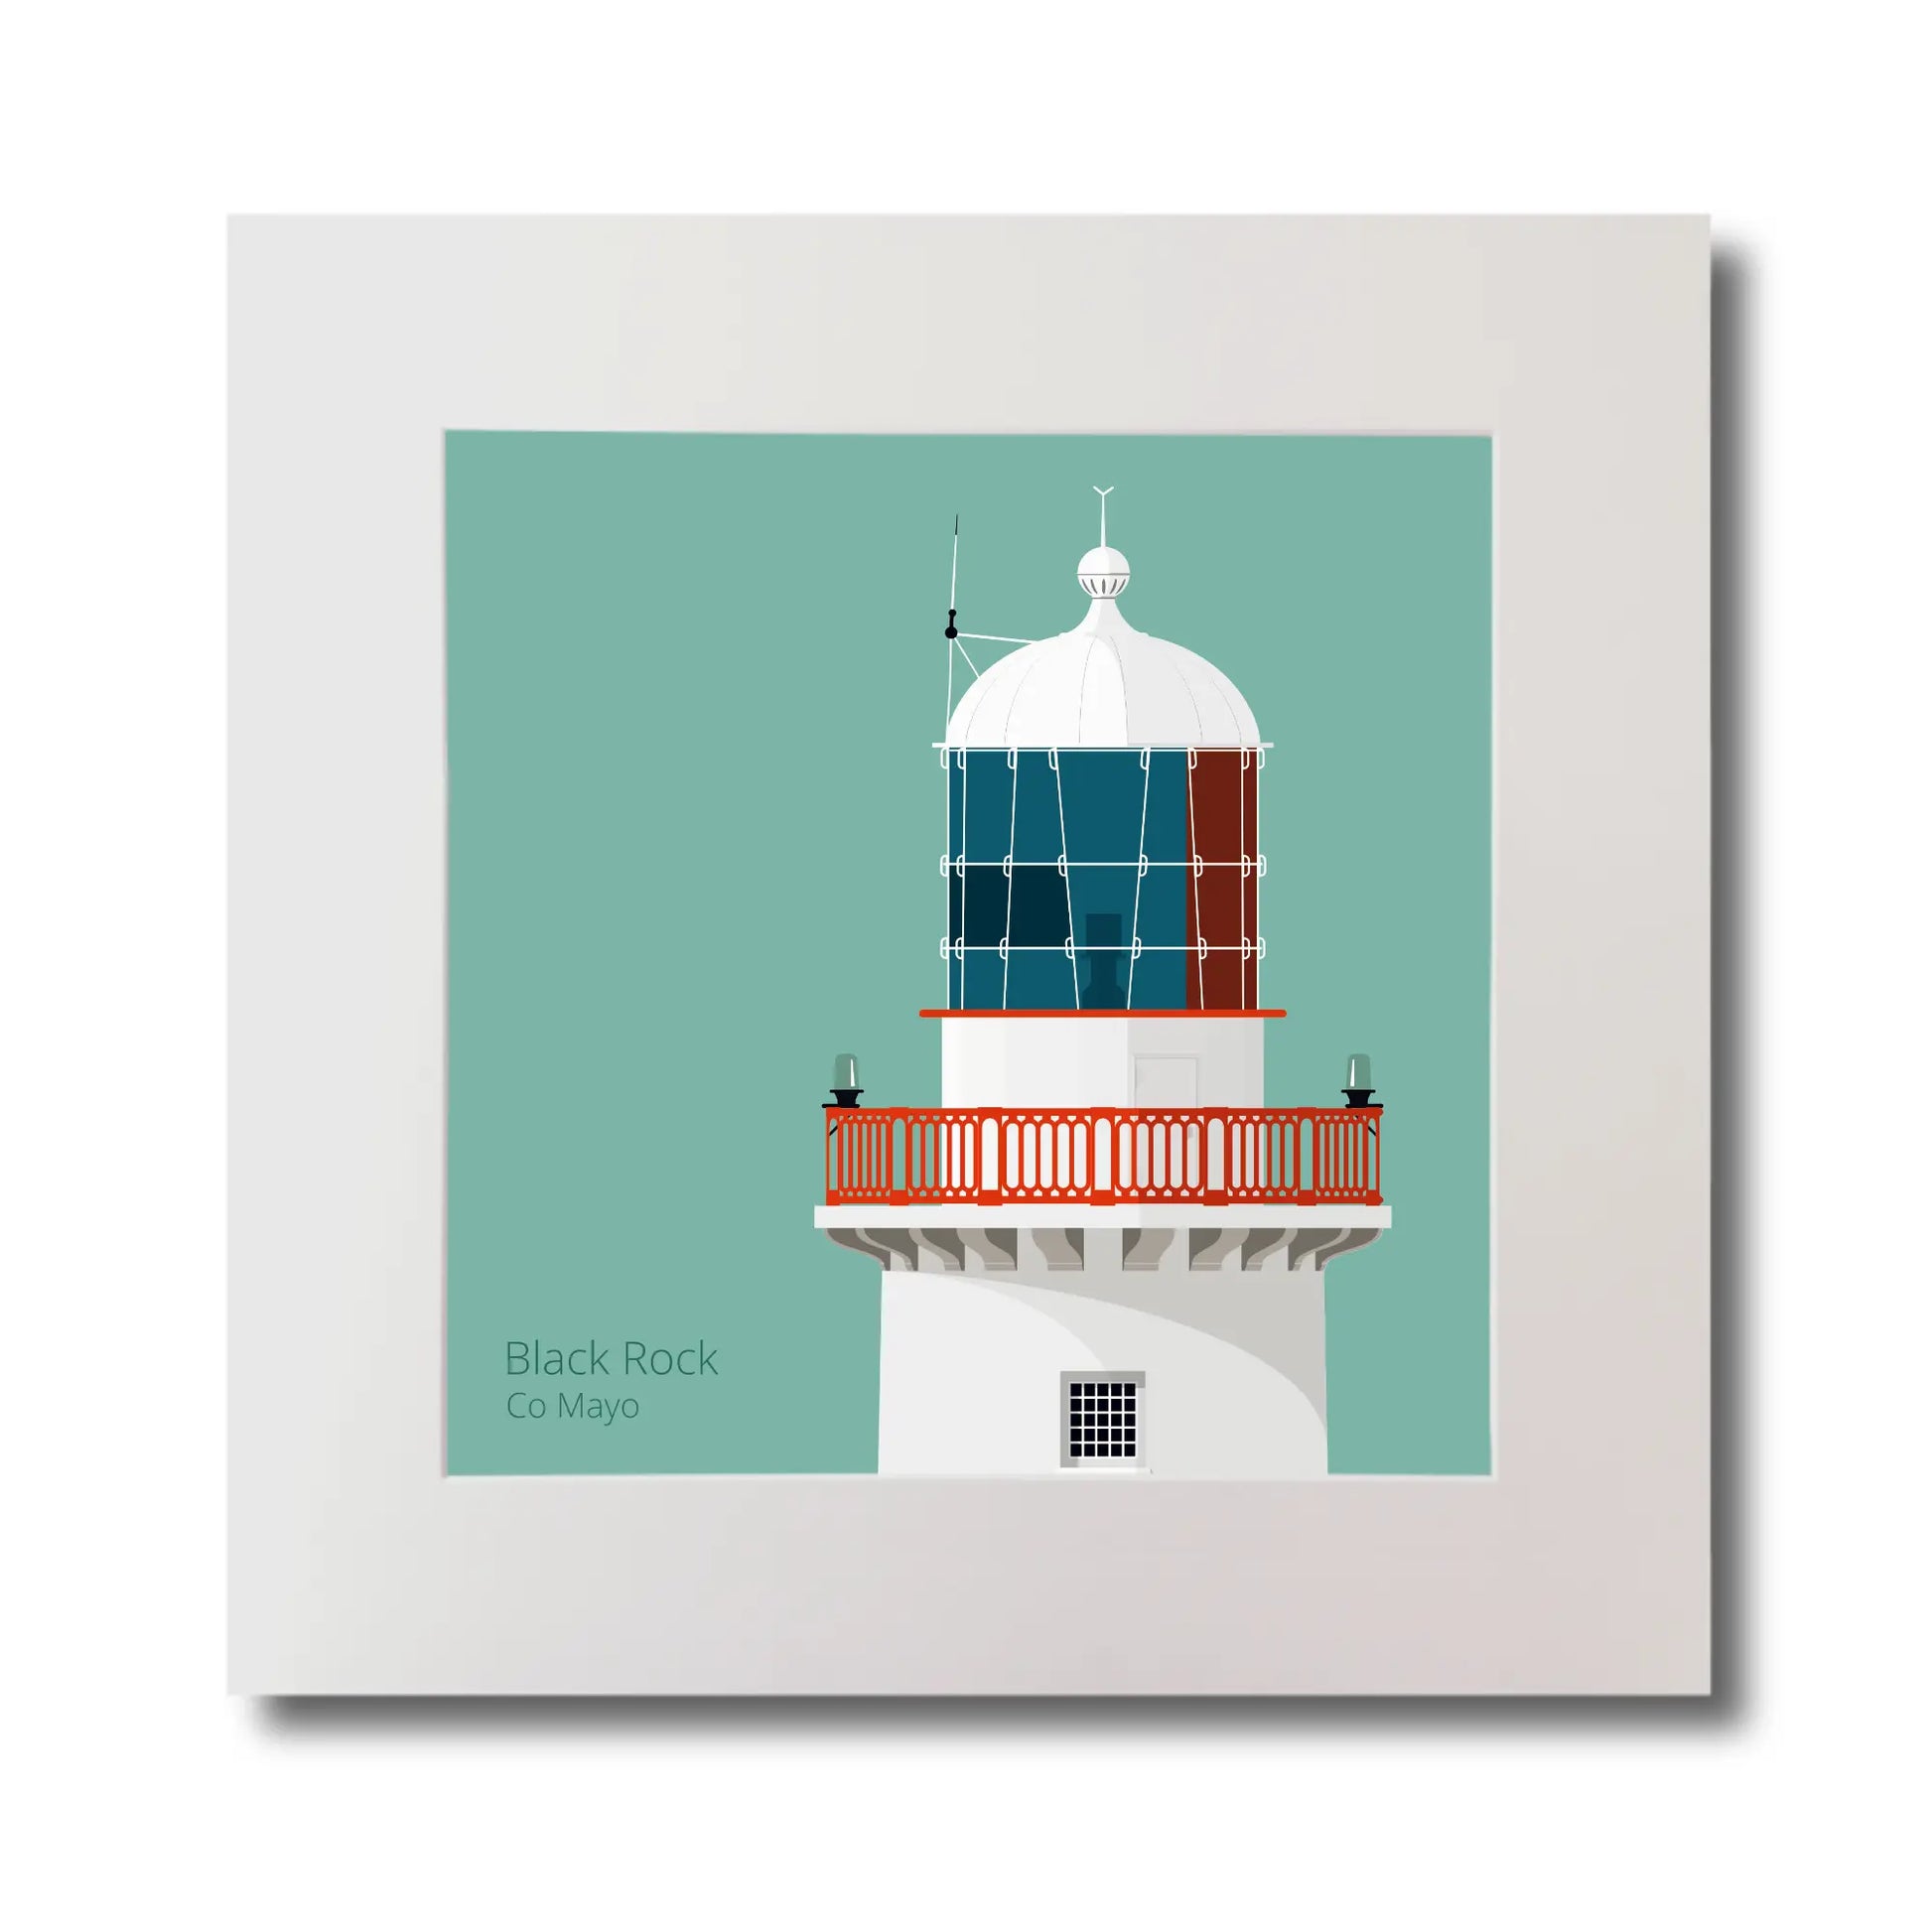 Illustration of Black Rock lighthouse on an ocean green background, mounted and measuring 30x30cm.